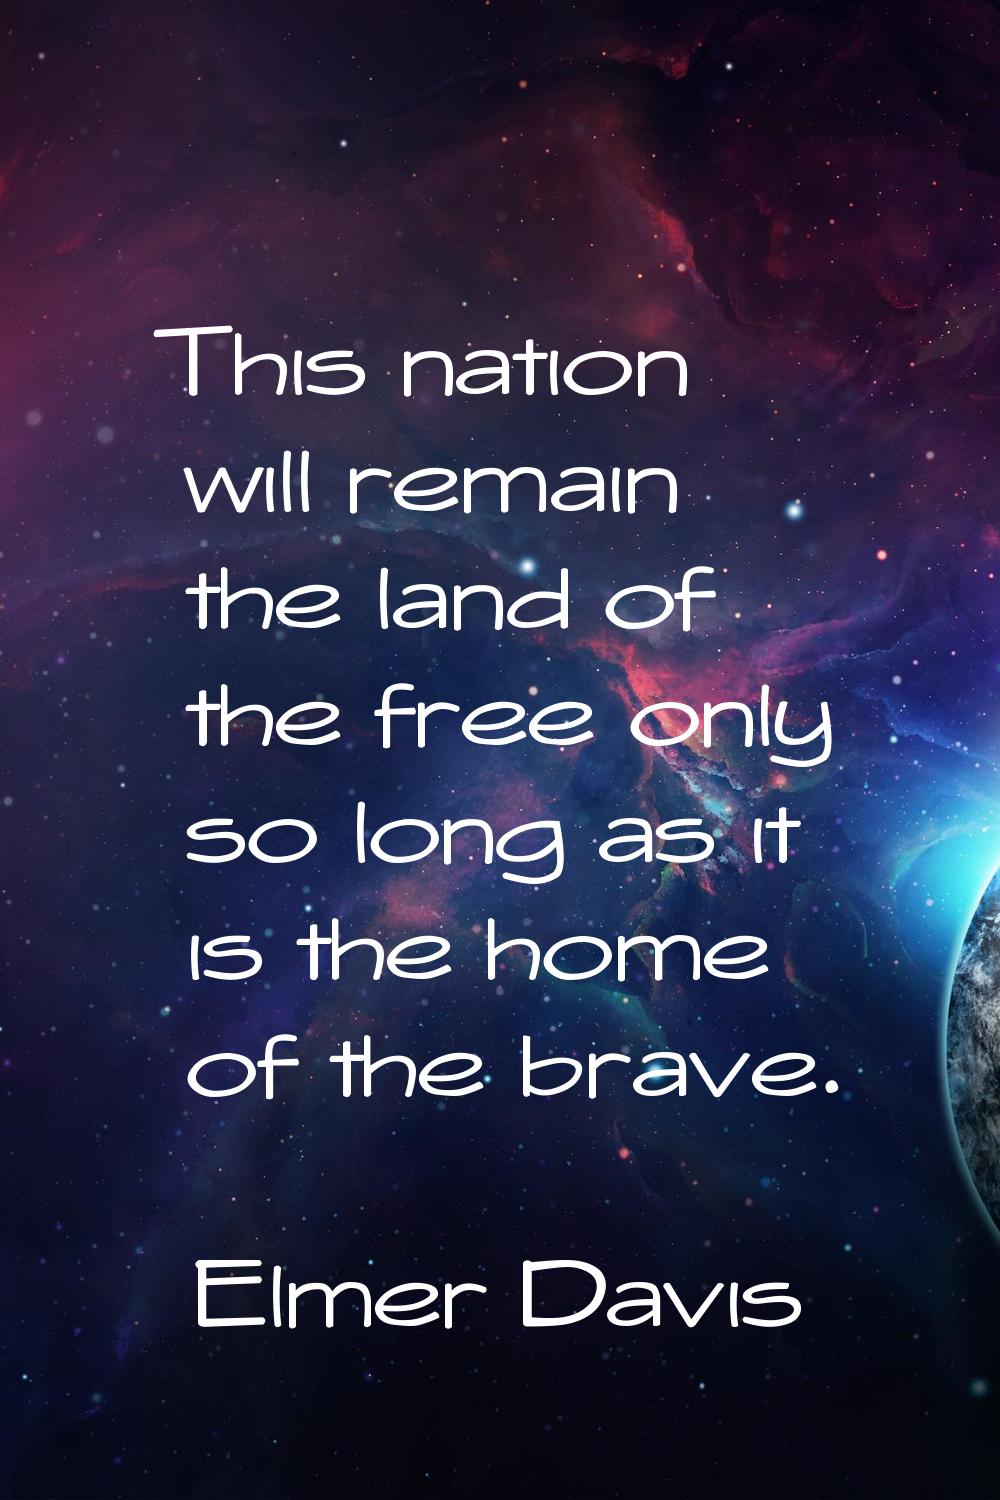 This nation will remain the land of the free only so long as it is the home of the brave.